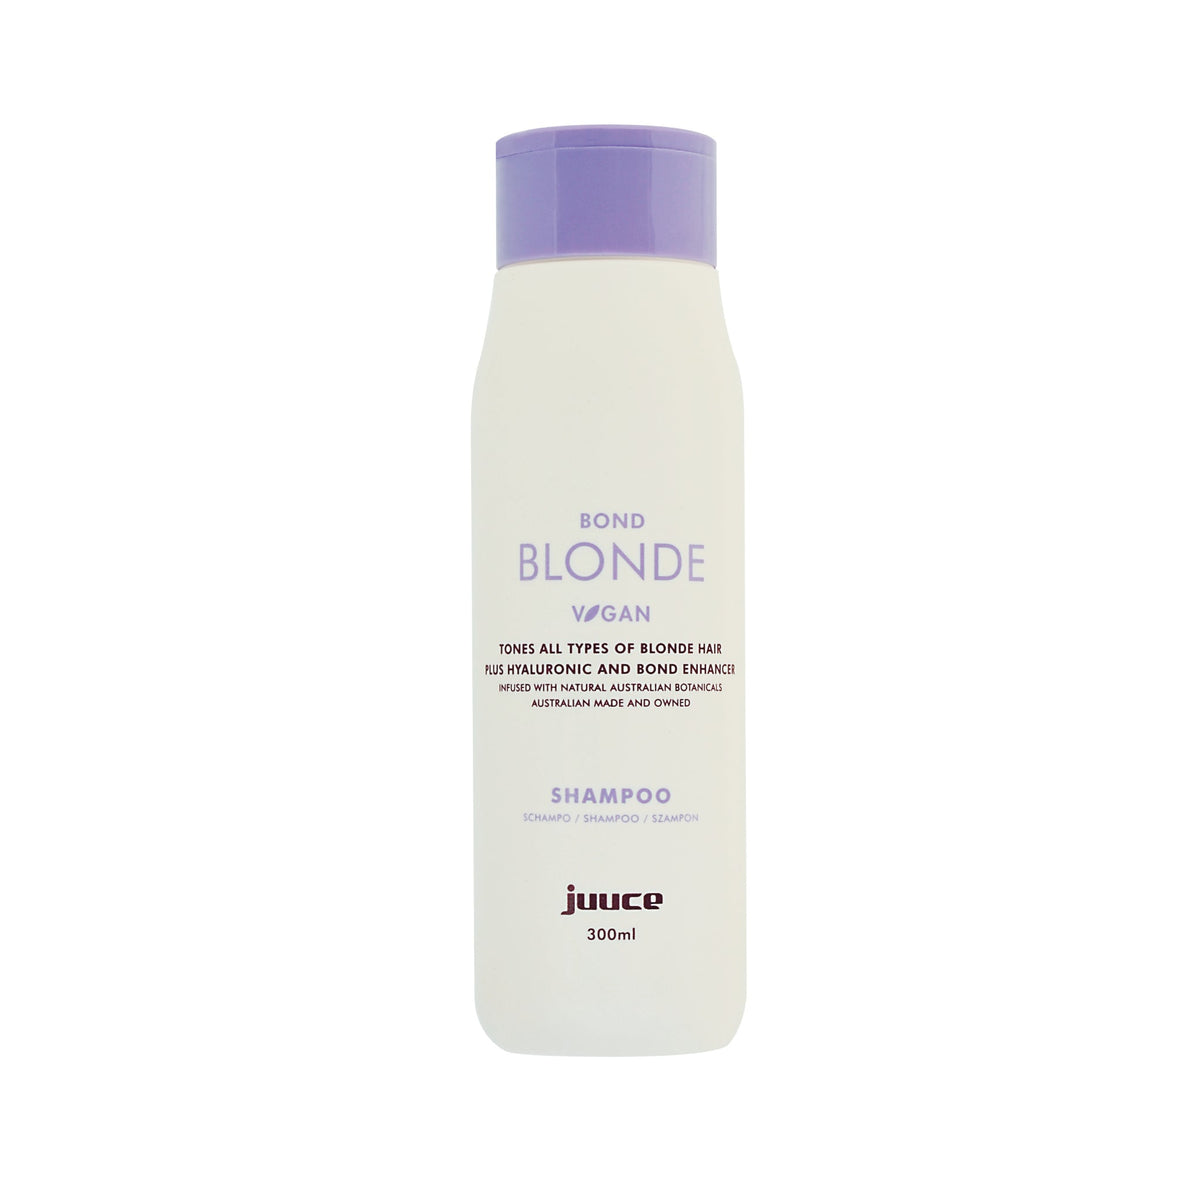 Juuce Bond Blonde Shampoo - Haircare Superstore